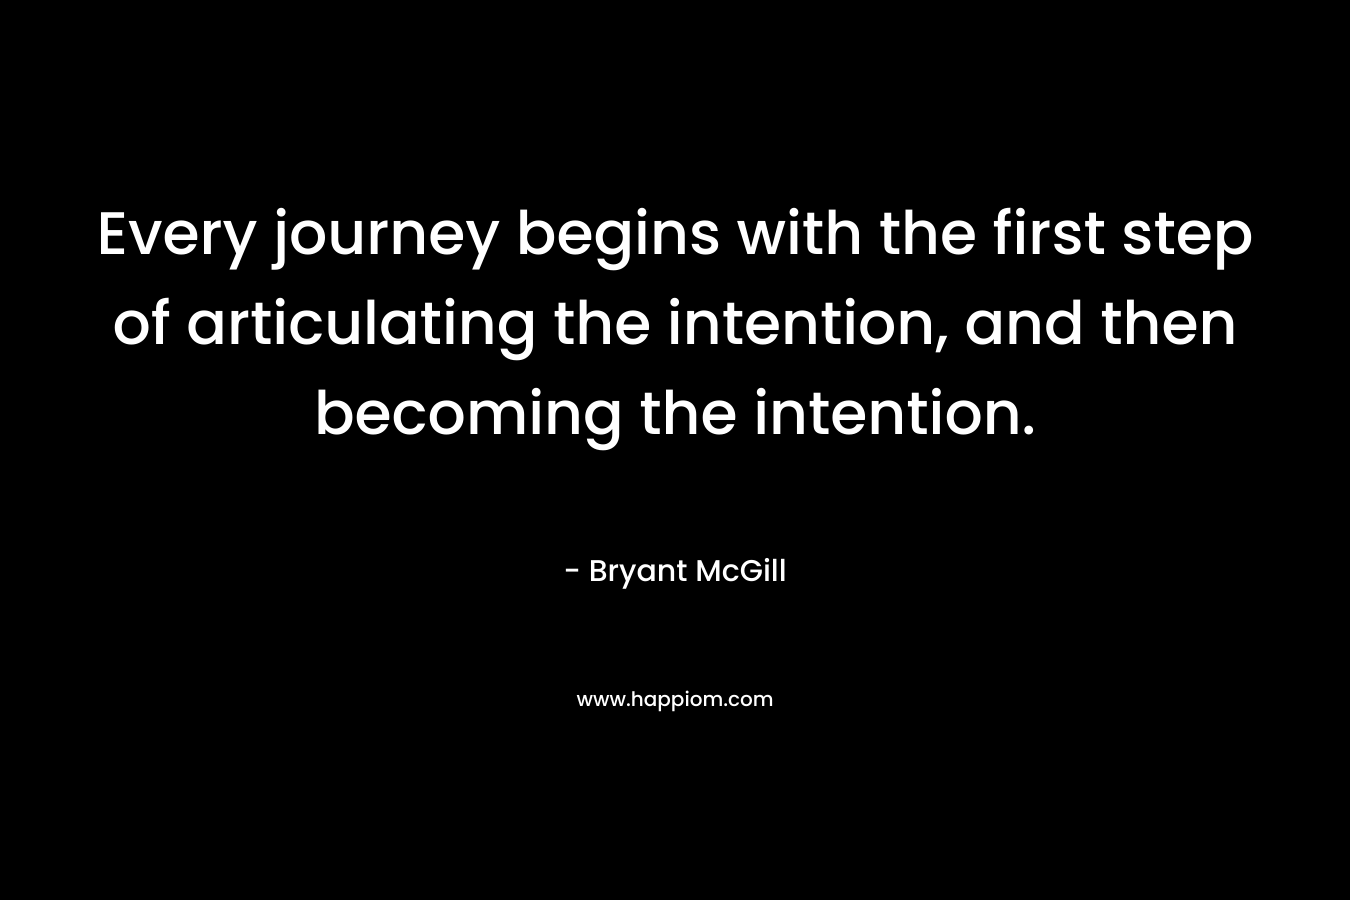 Every journey begins with the first step of articulating the intention, and then becoming the intention.